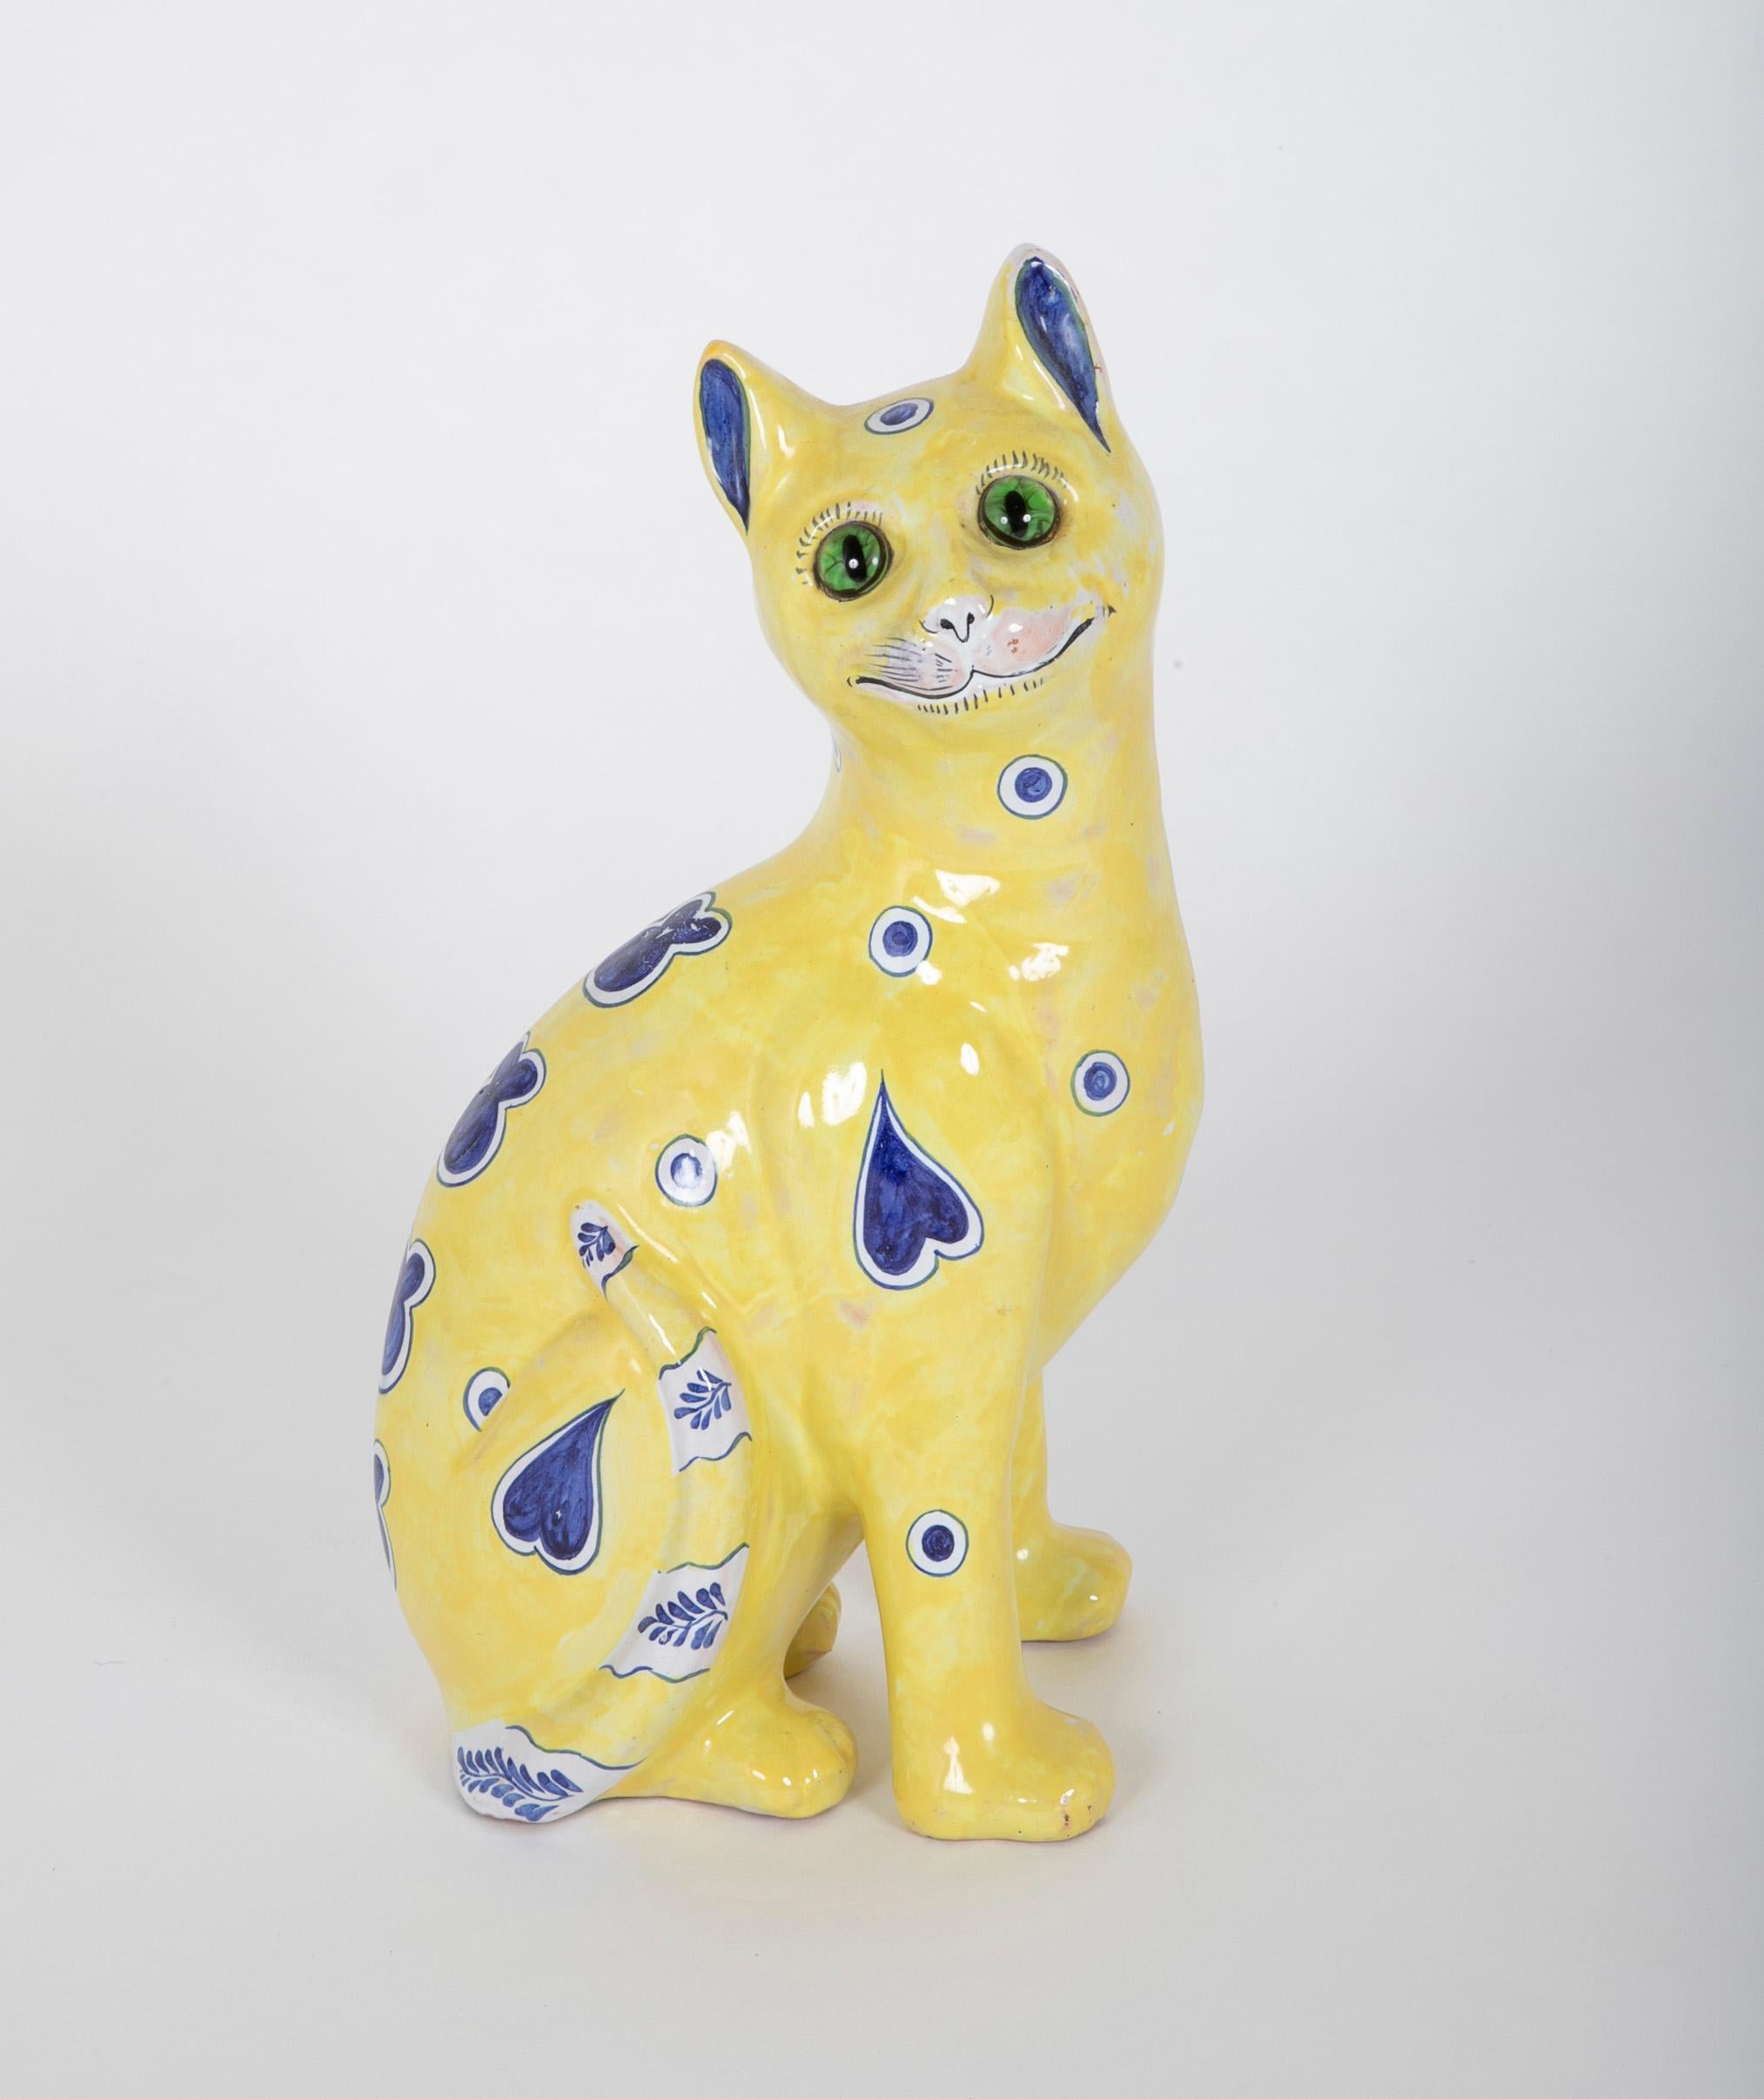 Late 19th century Emile Galle ( France 1846 - 1904 ) Cat - Signed 'Nancy'. Circa 1880 - 1890.